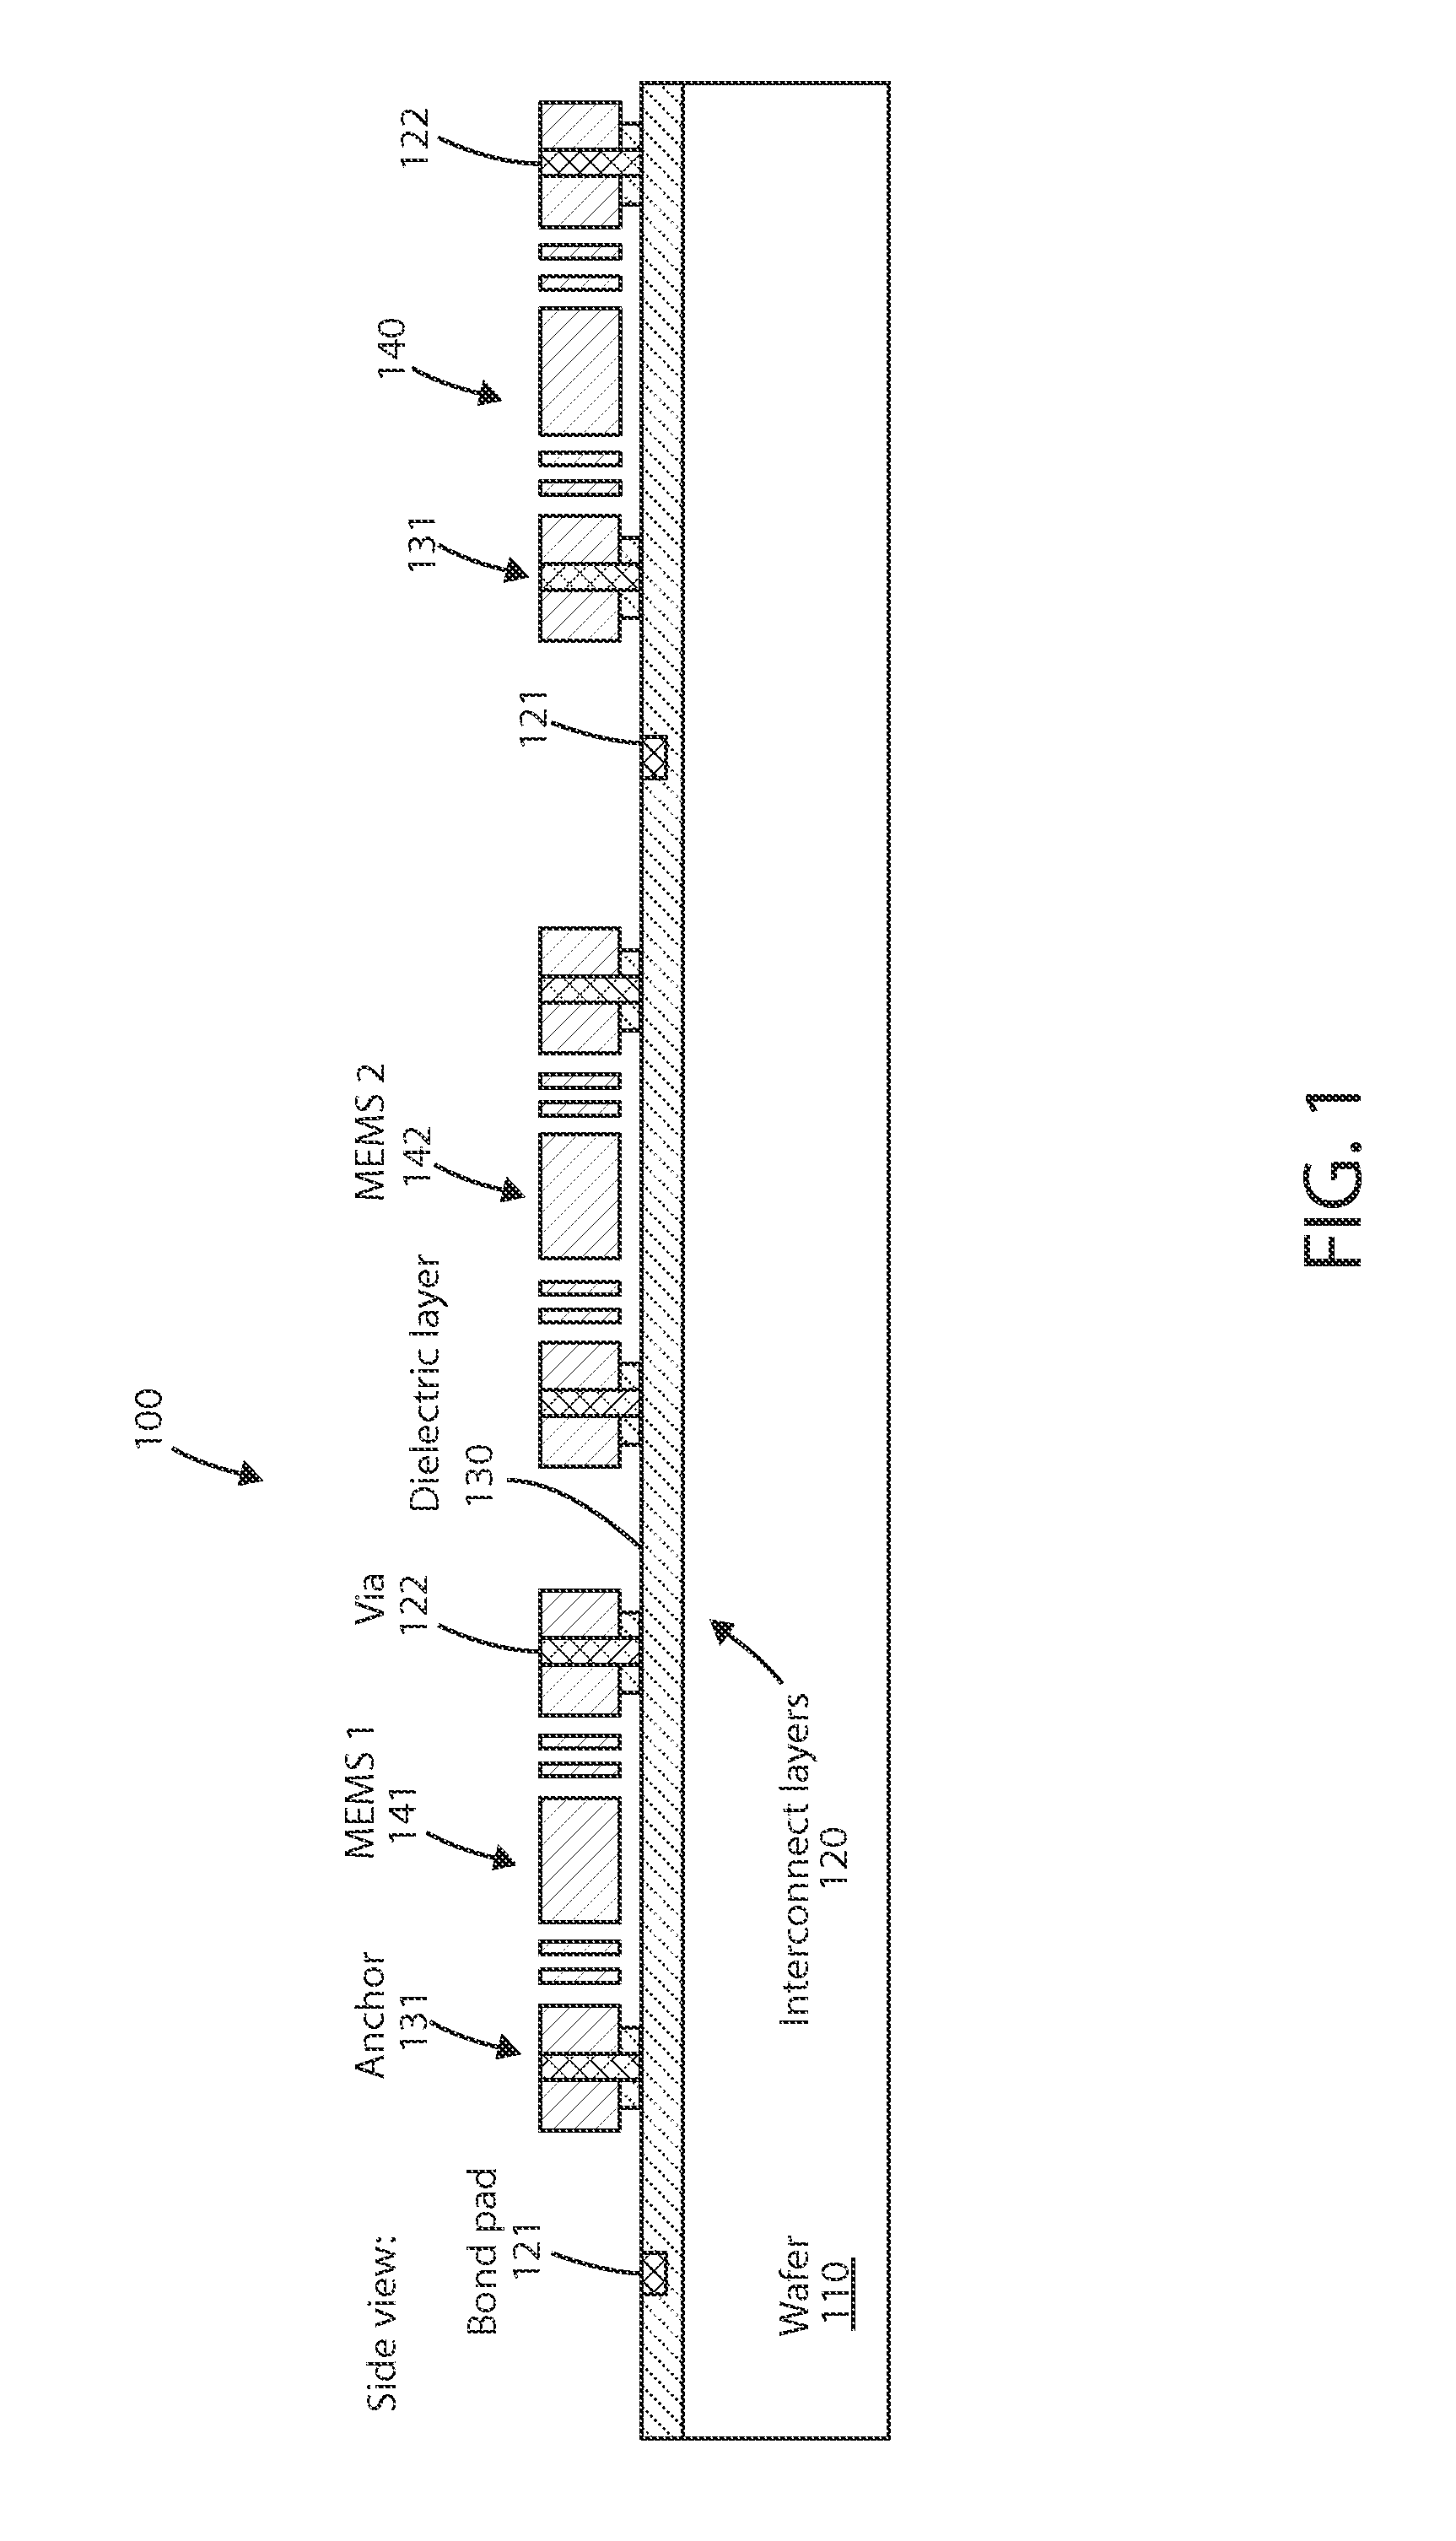 Method to package multiple MEMS sensors and actuators at different gases and cavity pressures